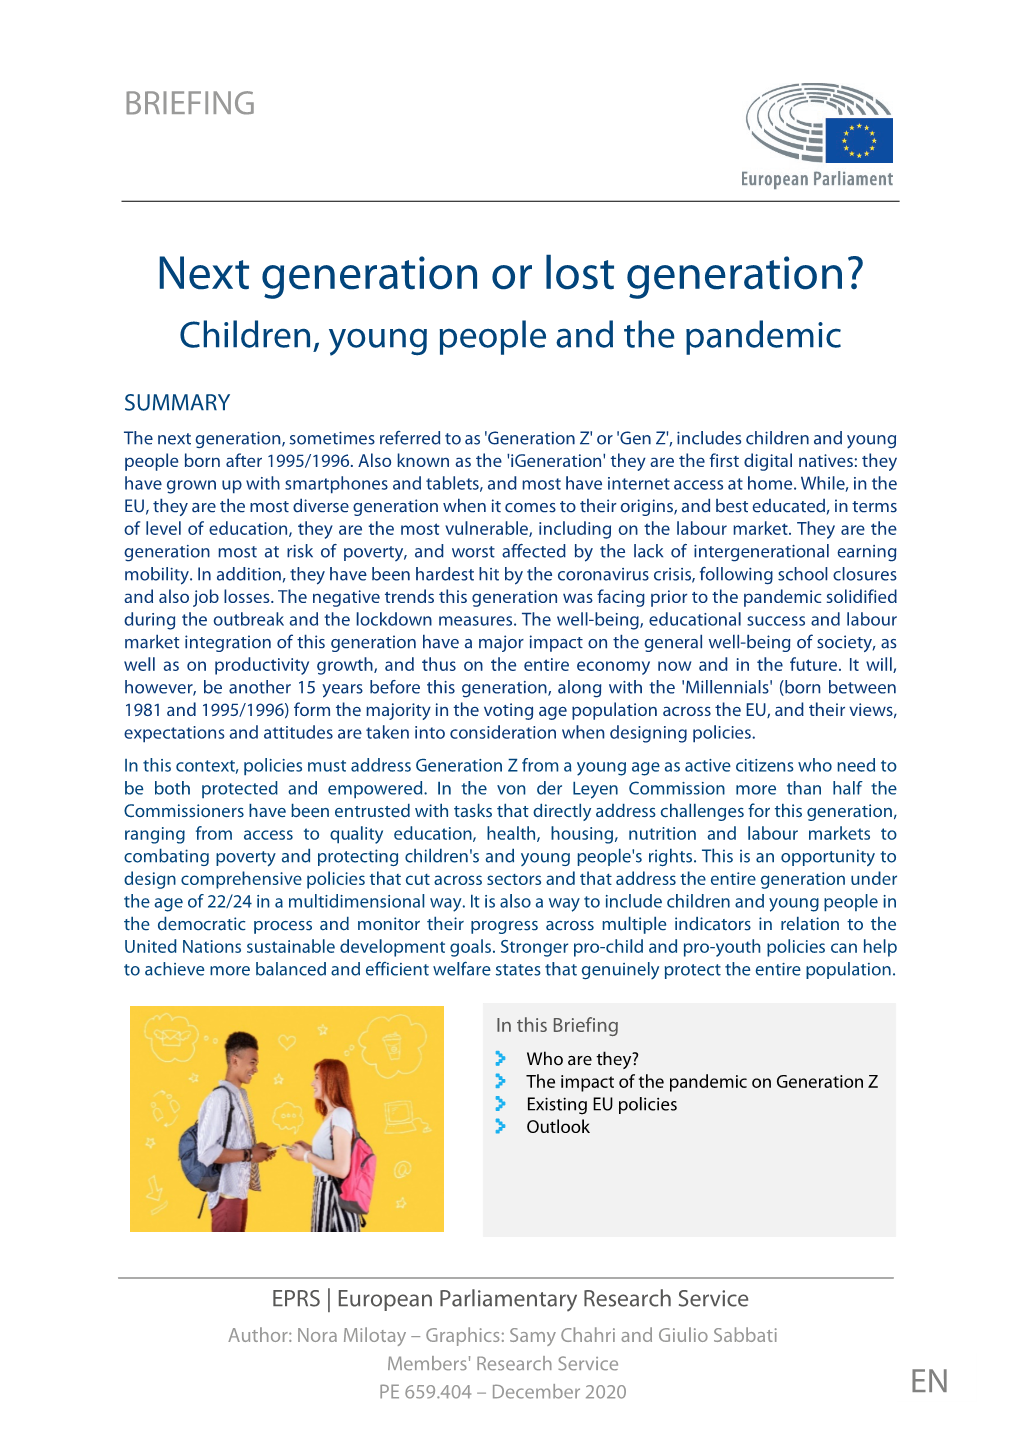 Next Generation Or Lost Generation? Children, Young People and the Pandemic